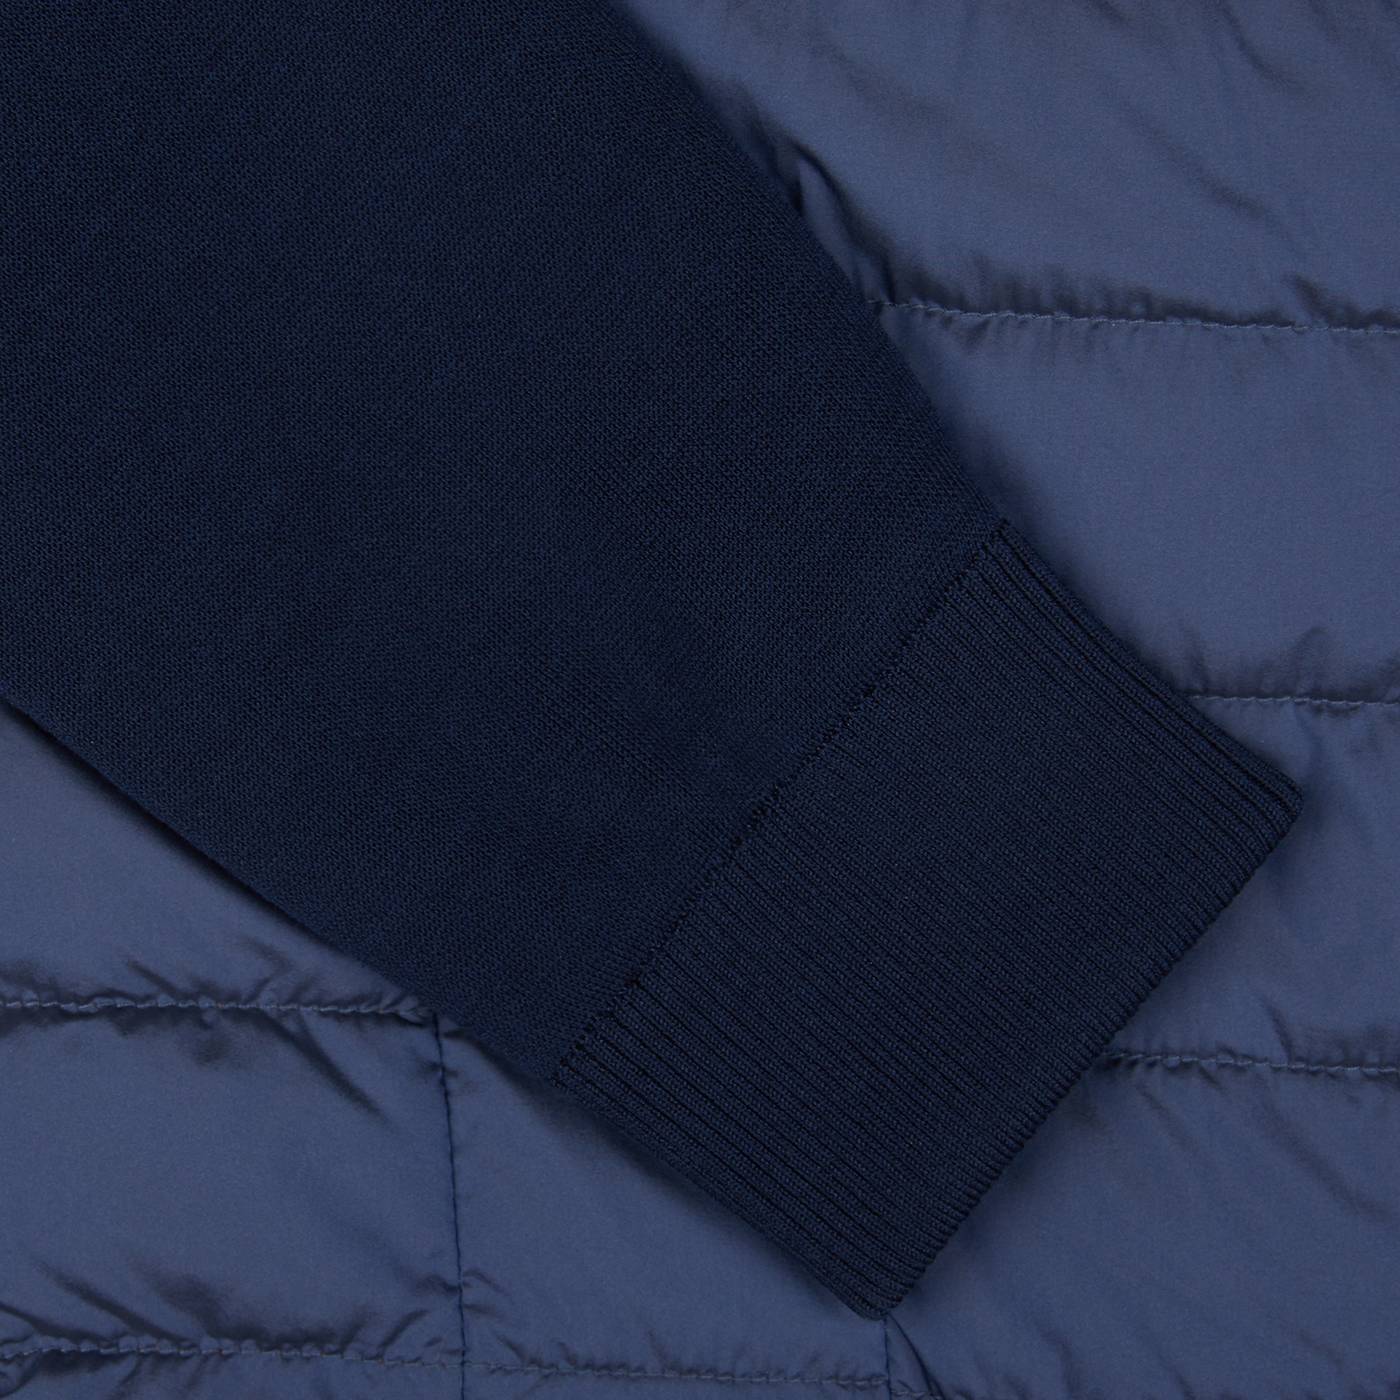 A close up of a Moorer Ocean Blue Nylon Knitted Sleeve Jacket.